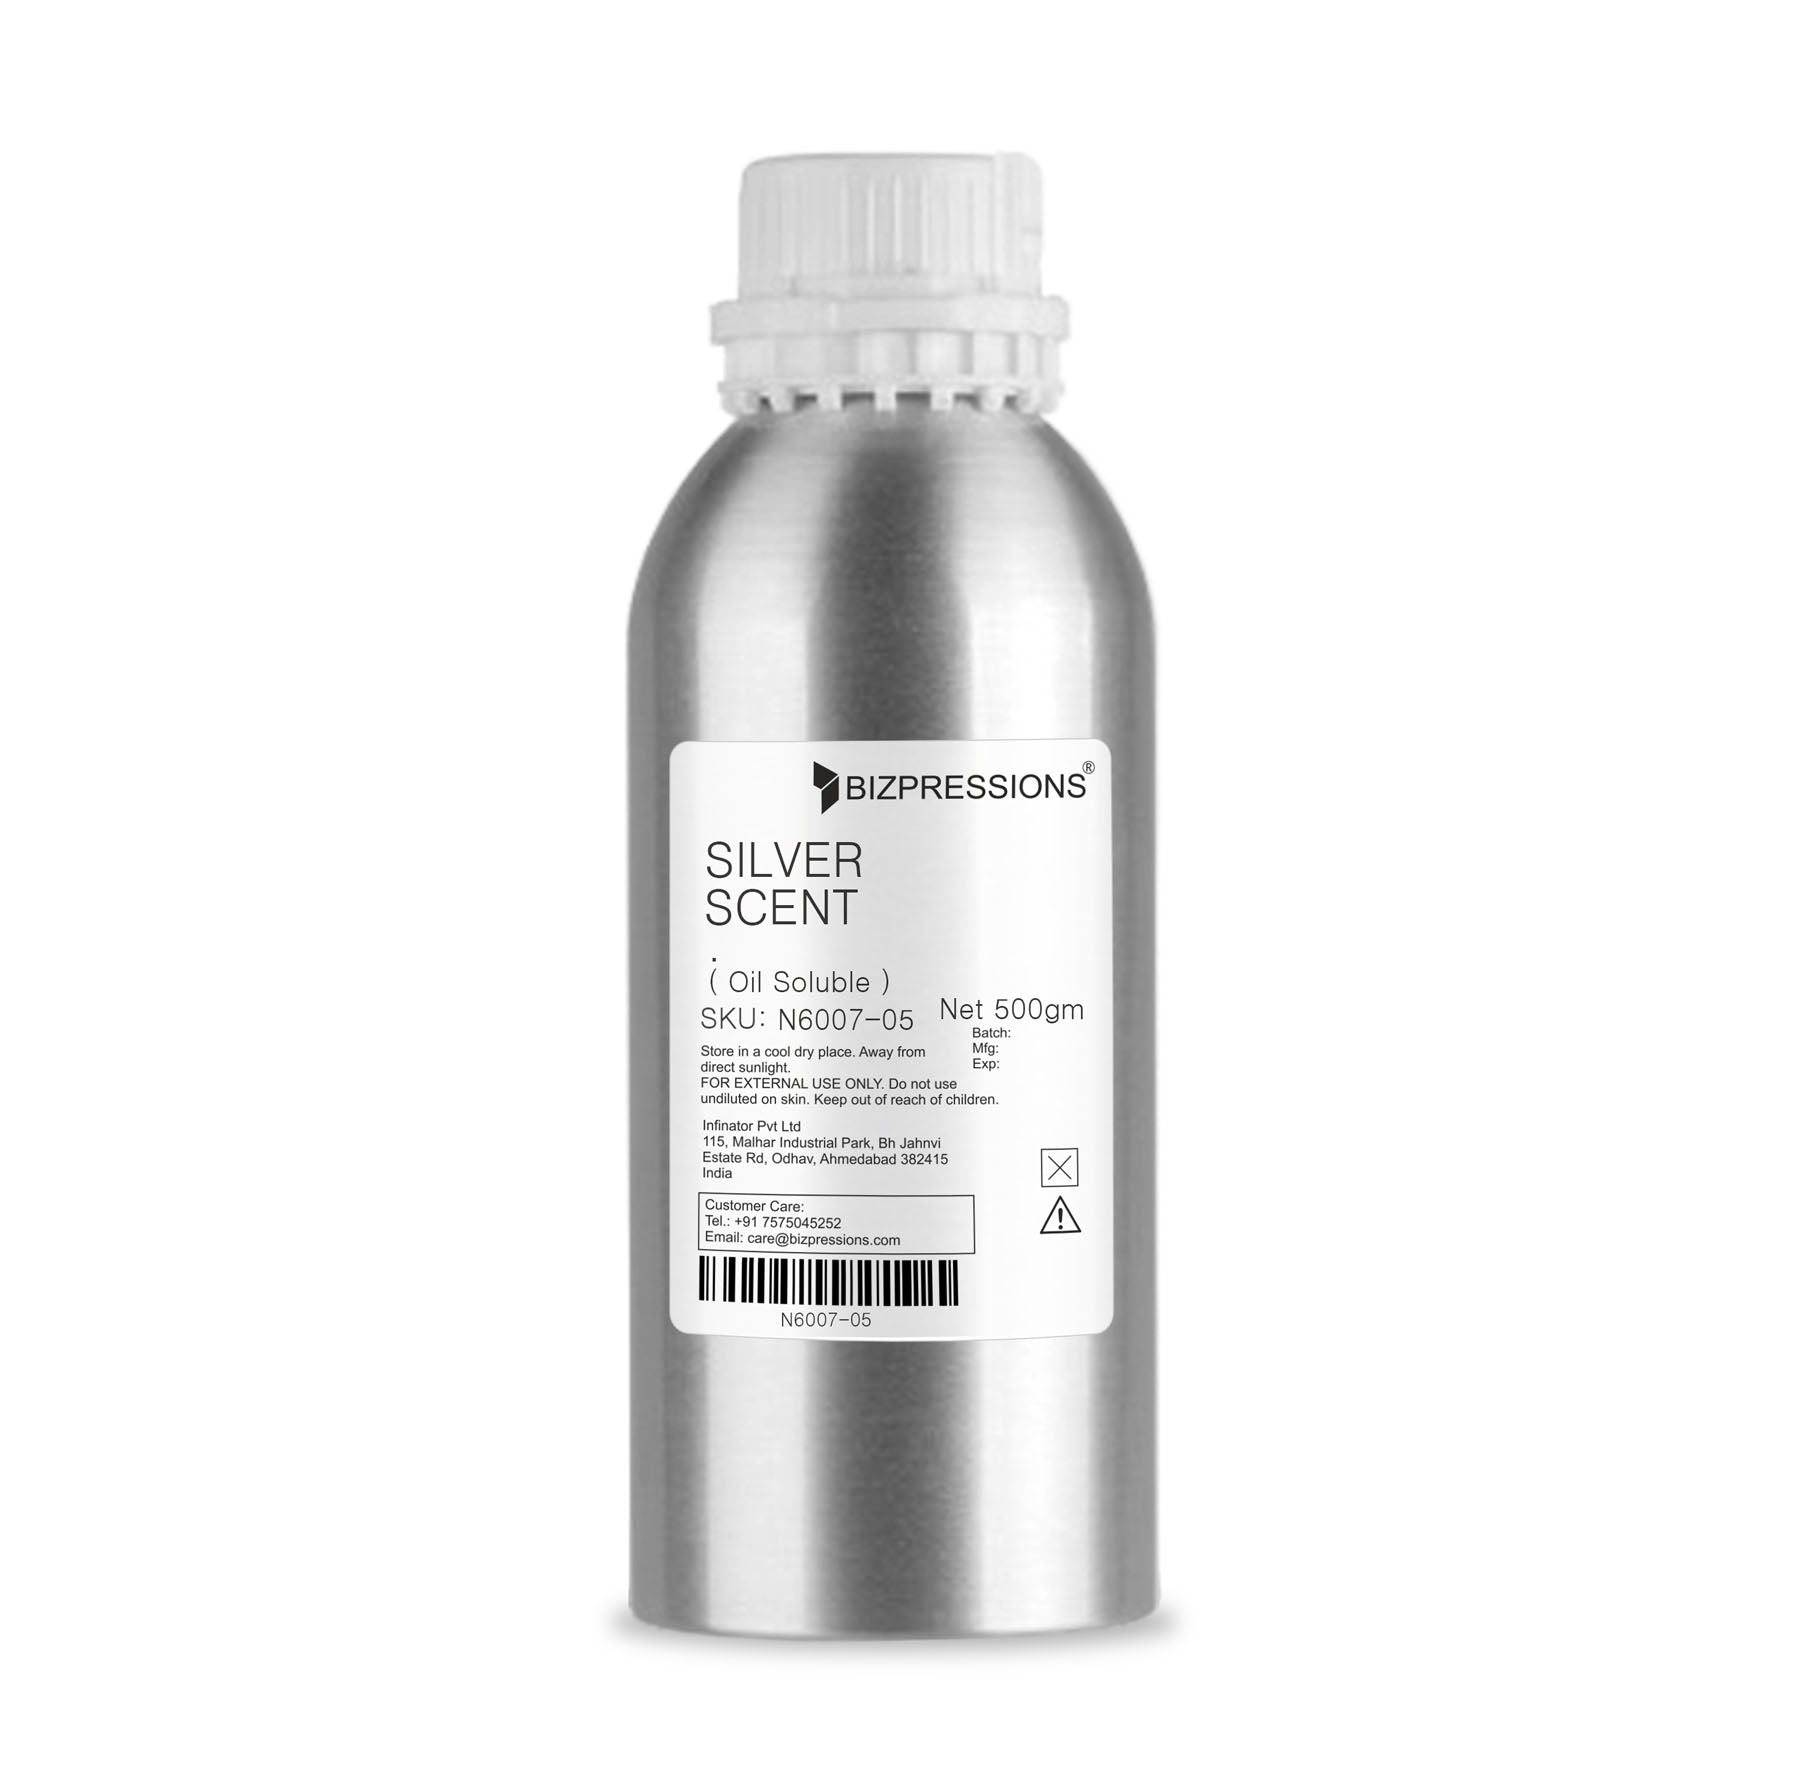 SILVER SCENT - Fragrance ( Oil Soluble ) - 500 gm